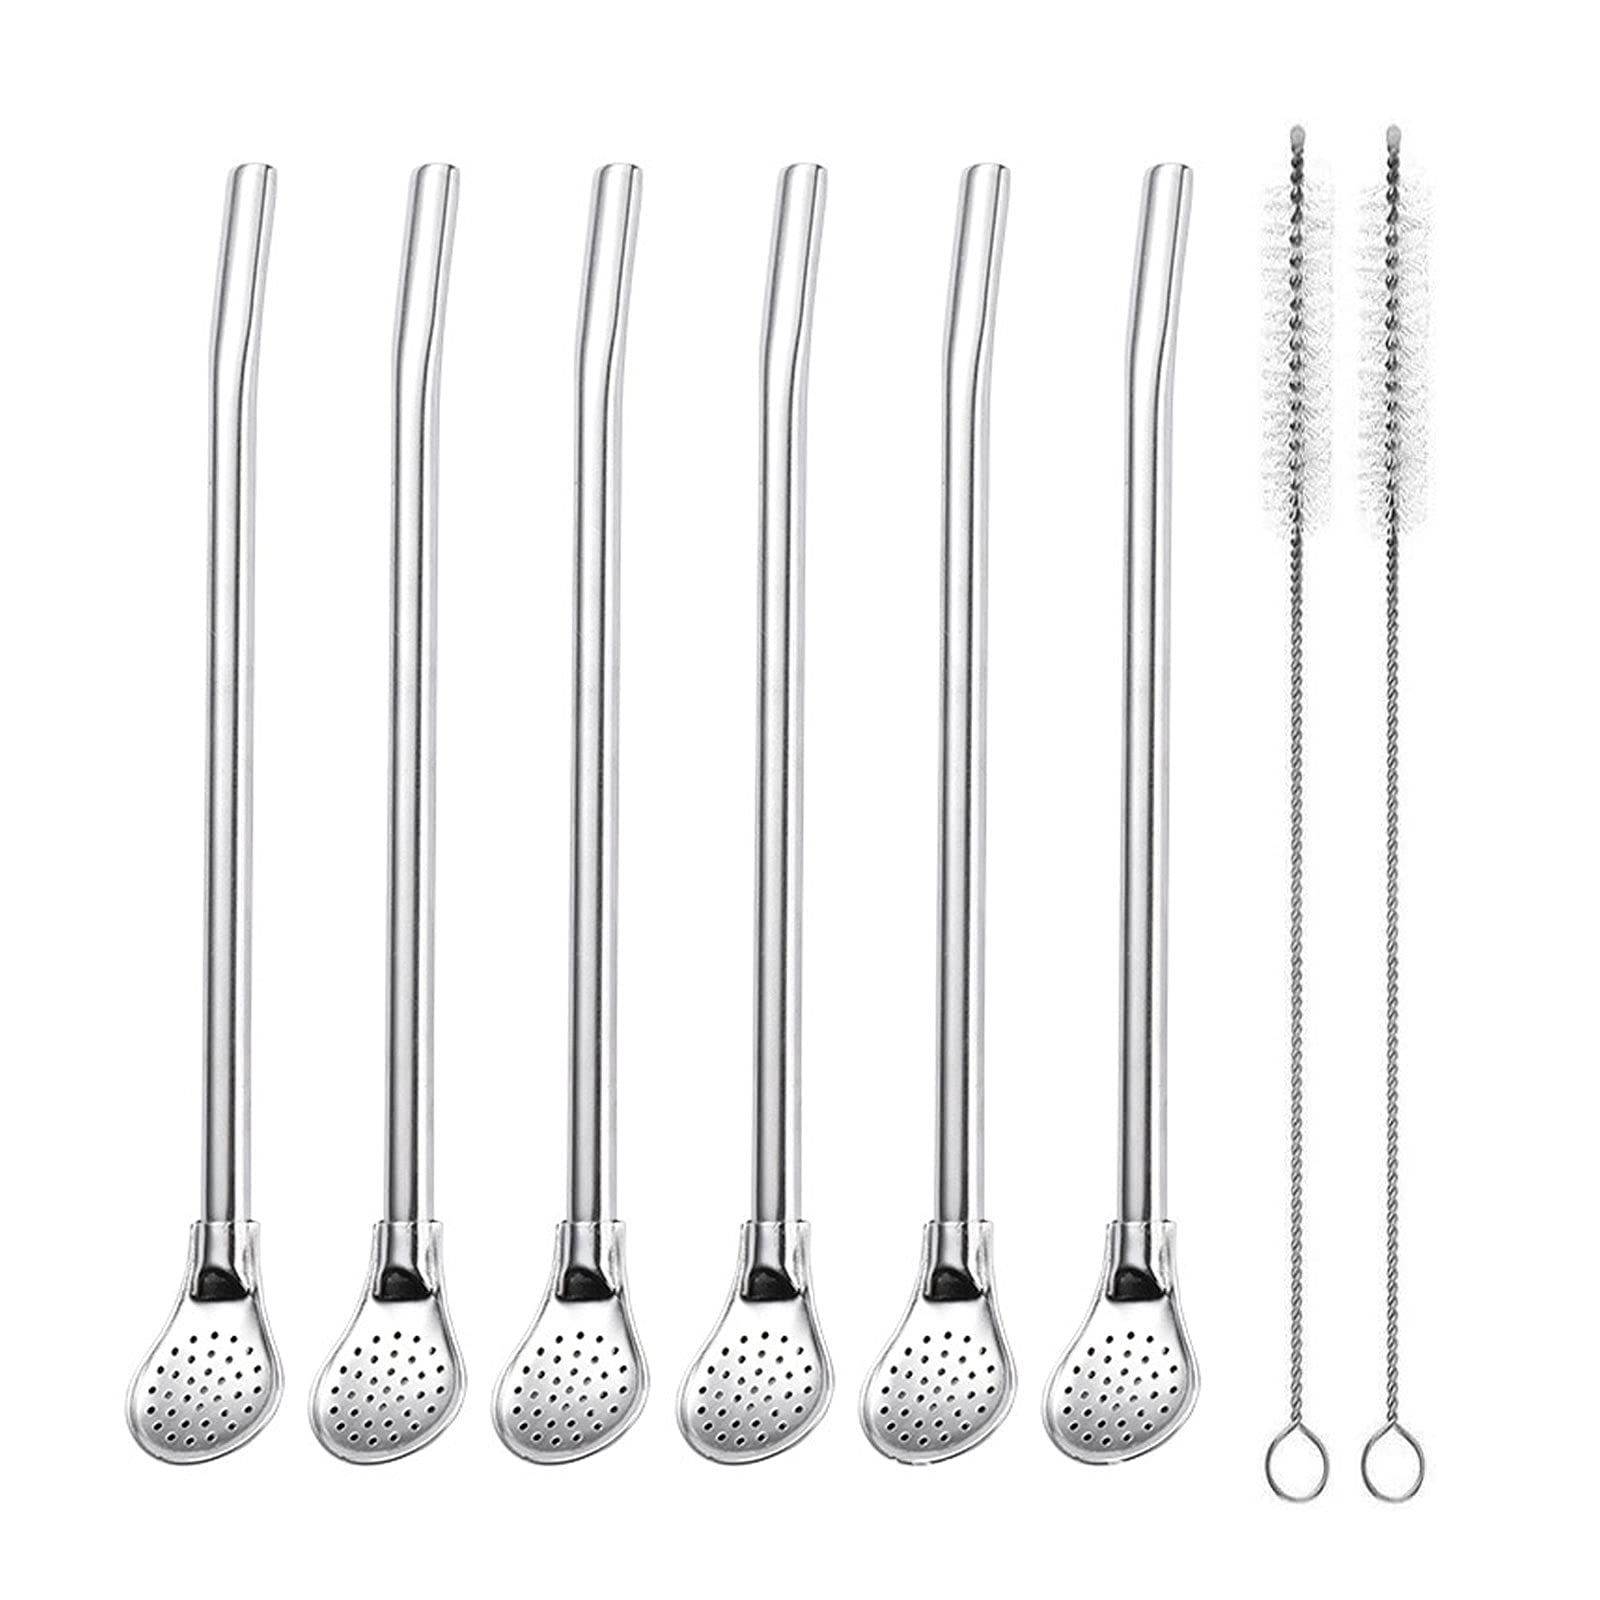 EvaGO Reusable Stainless Steel Drinking Straws with Filter Spoon 6 Pieces Yerba Mate Tea Bombilla Drinking Straws with 2 Pieces Cleaning Brushes Set, 7.1inch Long